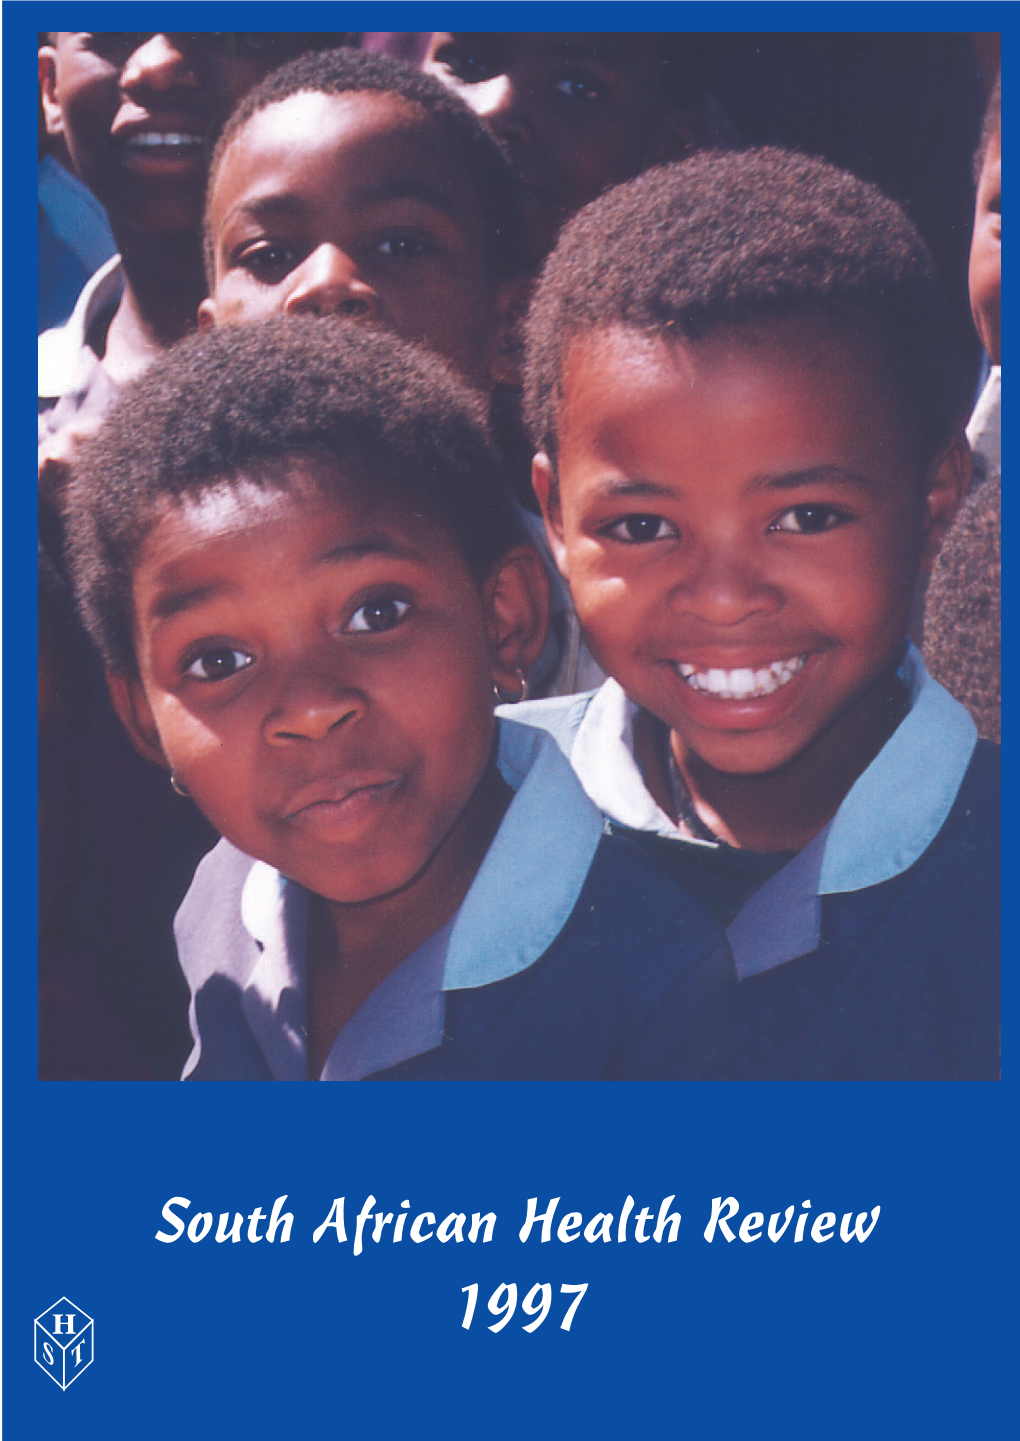 South African Health Review 1997